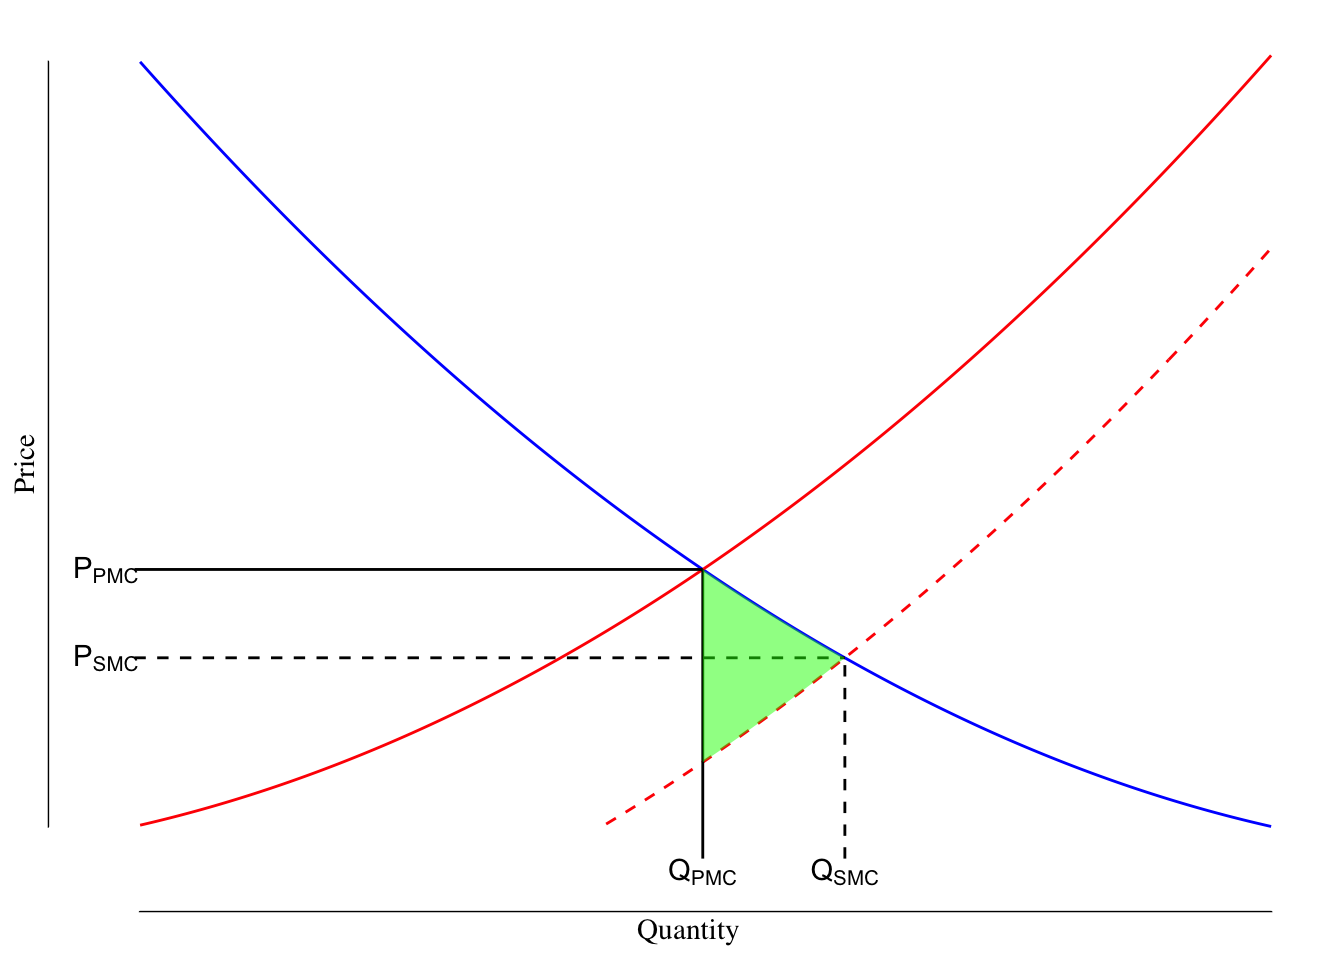 Demand, Private and Societial Marginal Cost Curves in a Market with a Positive Production Externality. The blue line is the demand curve while the red lines denote the PMC (solid) and SMC (dashed) curves. The black lines measure the quantity and price using the PMC (solid) and SMC (dashed) marginal cost curves. The deadweight loss is shaded in green.